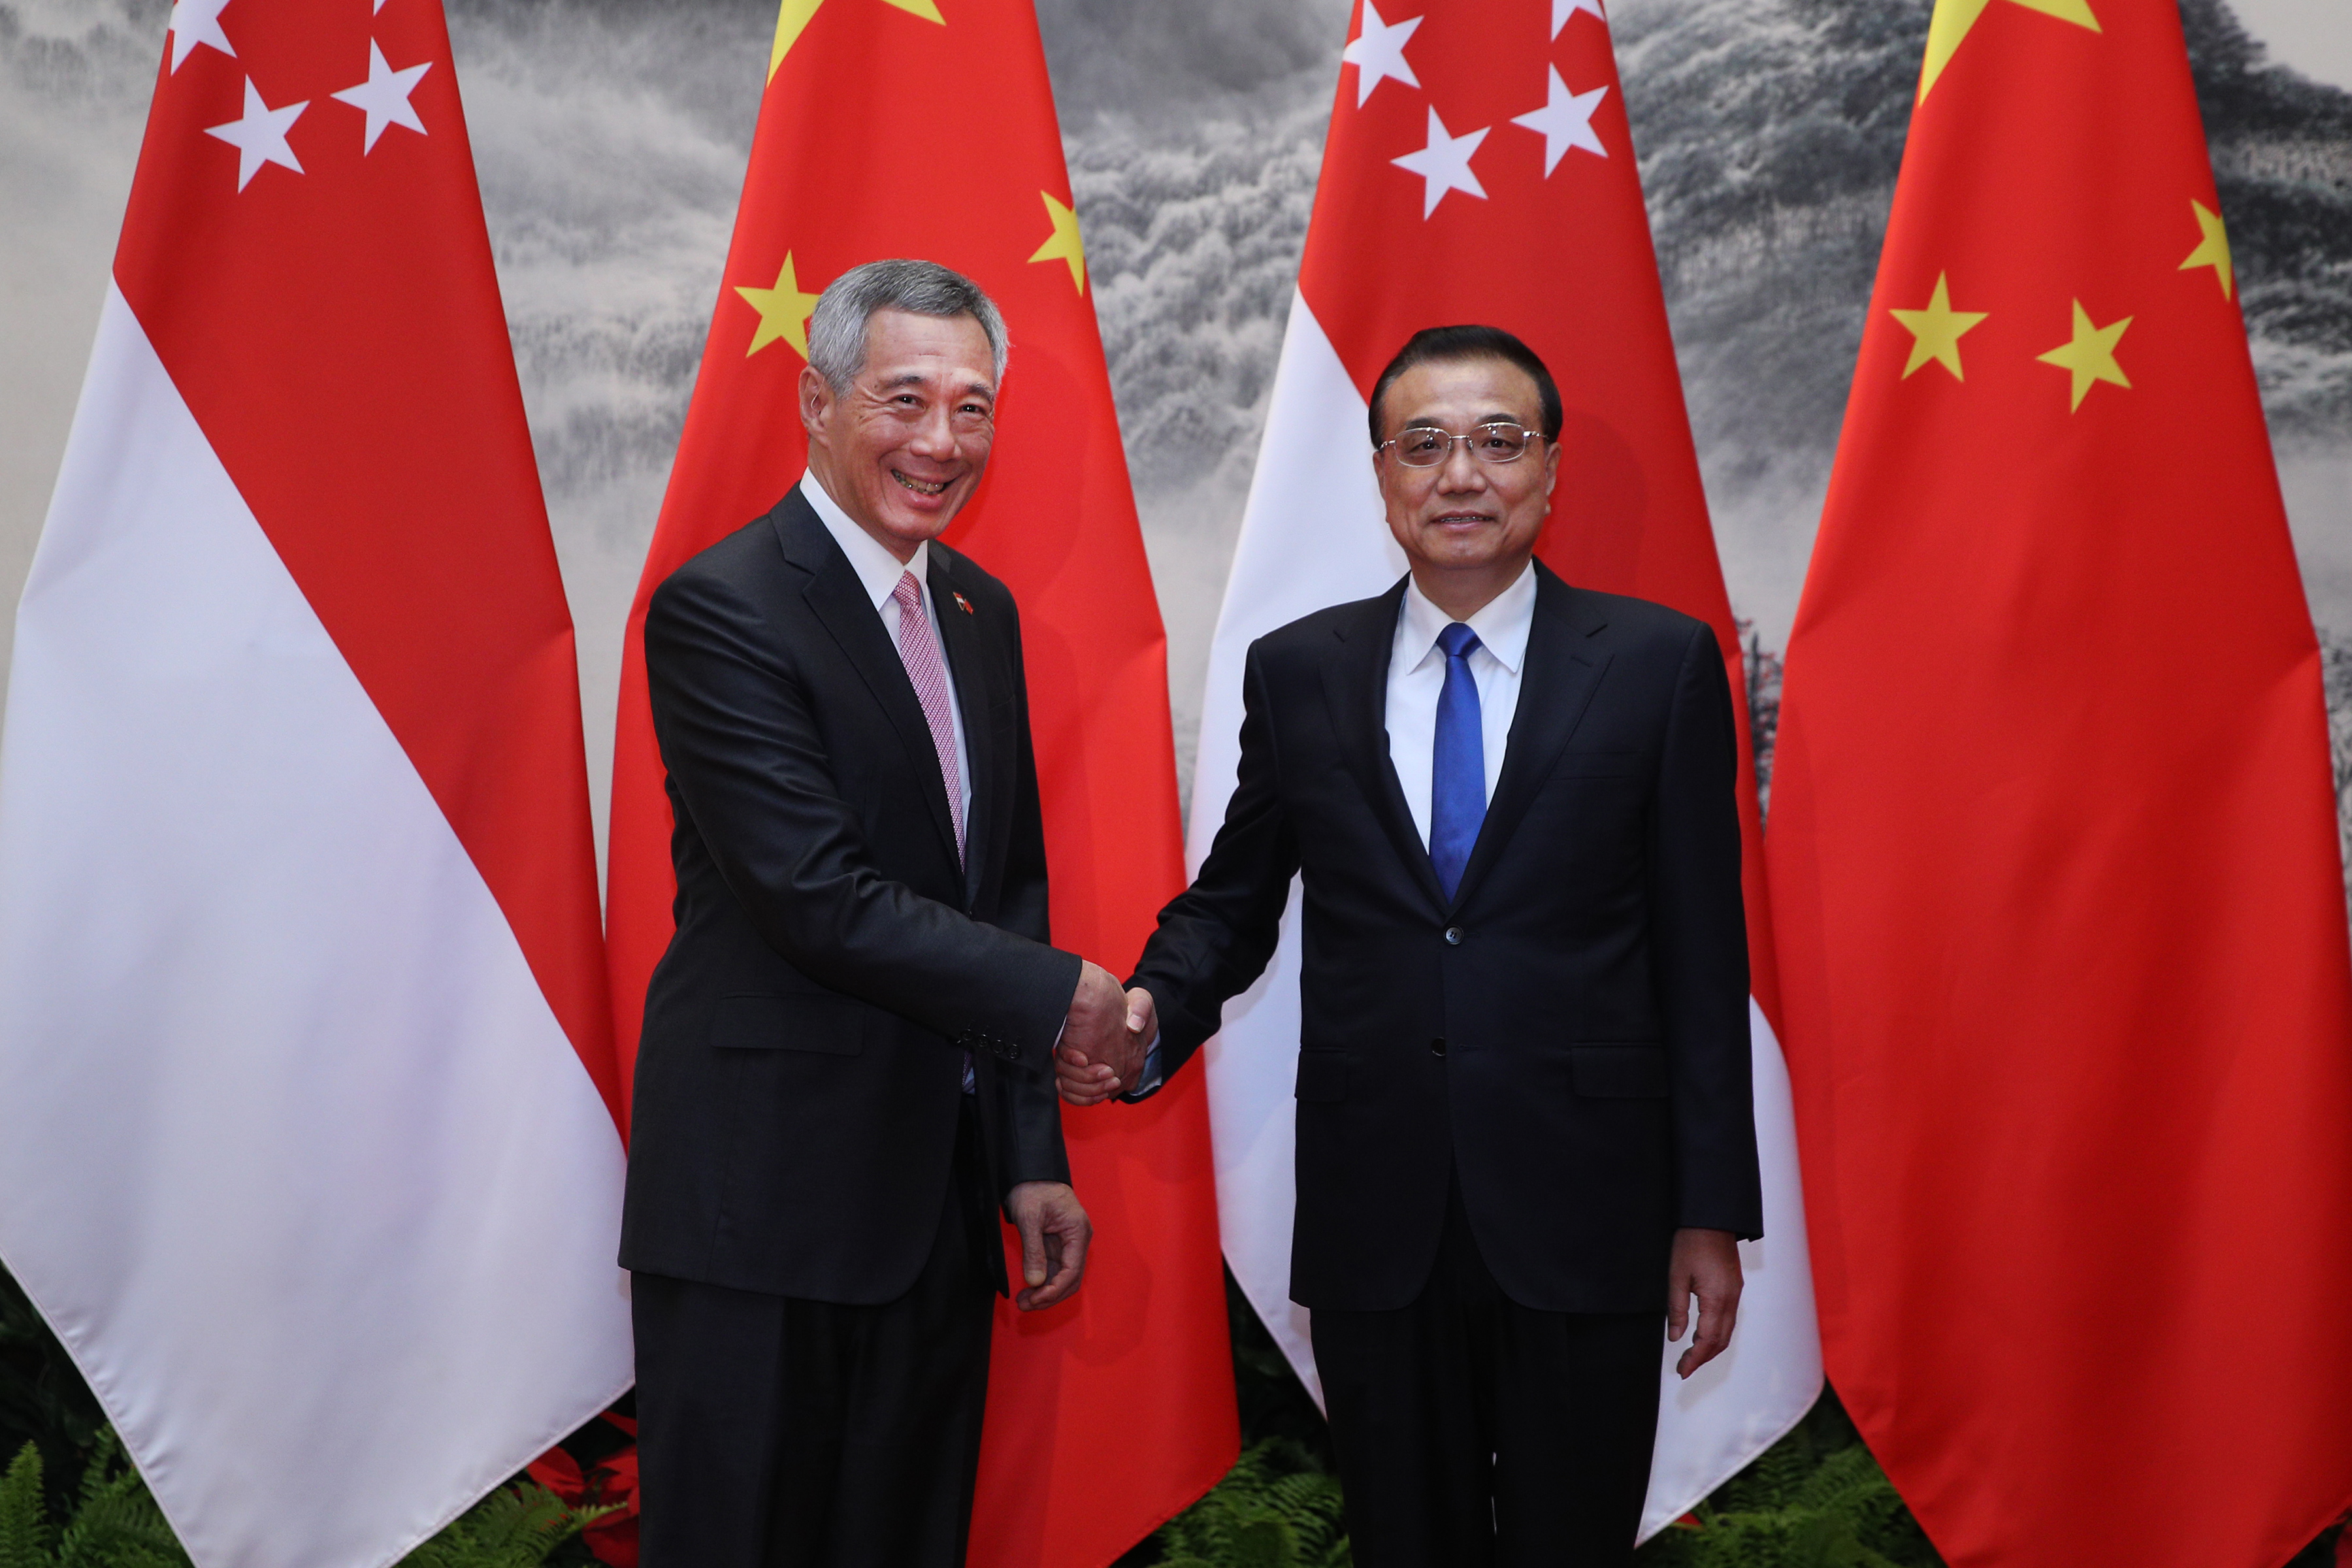 PM Lee Hsien Loong meeting Chinese Premier Li Keqiang on 19 Sep 2017 (MCI Photo by Chwee)